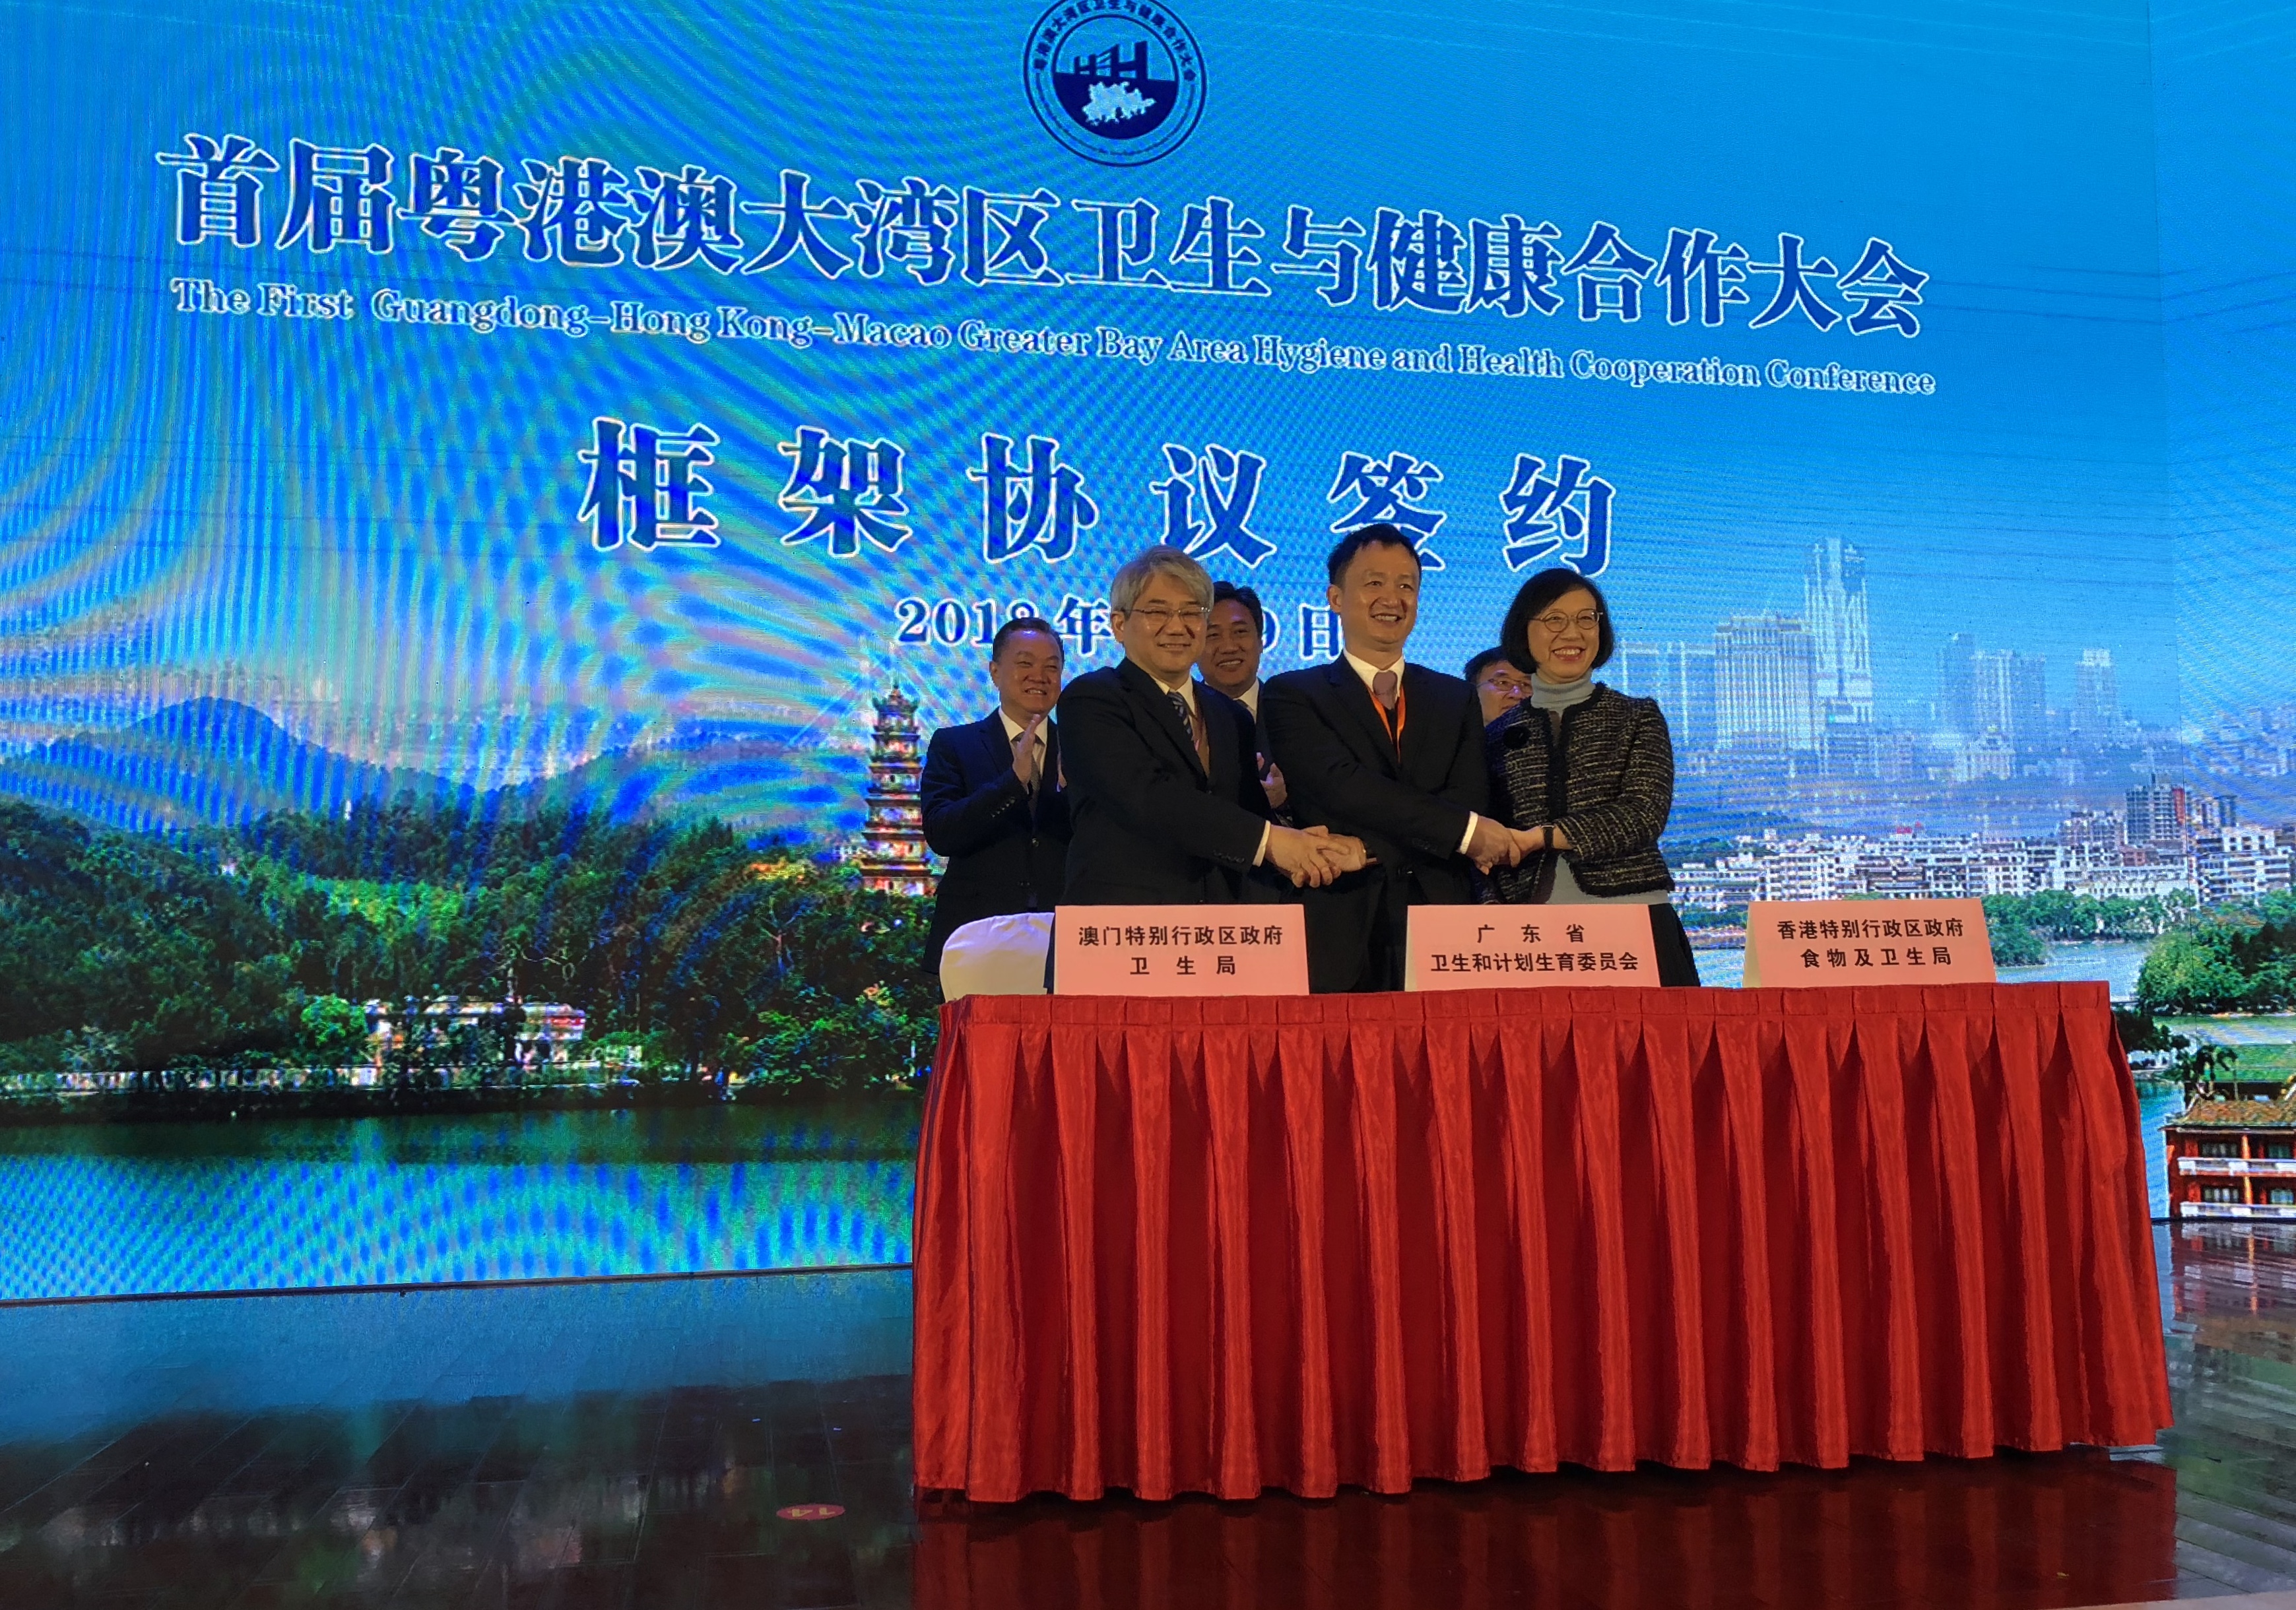 The Secretary for Food and Health, Professor Sophia Chan, led a delegation to Huizhou to attend the first Guangdong-Hong Kong-Macao Hygiene and Health Cooperation Conference today (January 9) to promote closer ties with the Mainland and Macao health authorities. The conference was co-organised by the Health and Family Planning Commission of Guangdong Province, the Food and Health Bureau, and the Health Bureau of the Macao Special Administrative Region Government. Professor Chan (right) is pictured after signing a framework agreement on co-operation among the three places on hygiene and health with the Director General of Guangdong Provincial Health and Family Planning Commission, Mr Duan Yufei (centre), and the Director of the Health Bureau of Macao, Dr Lei Chin-ion (left).